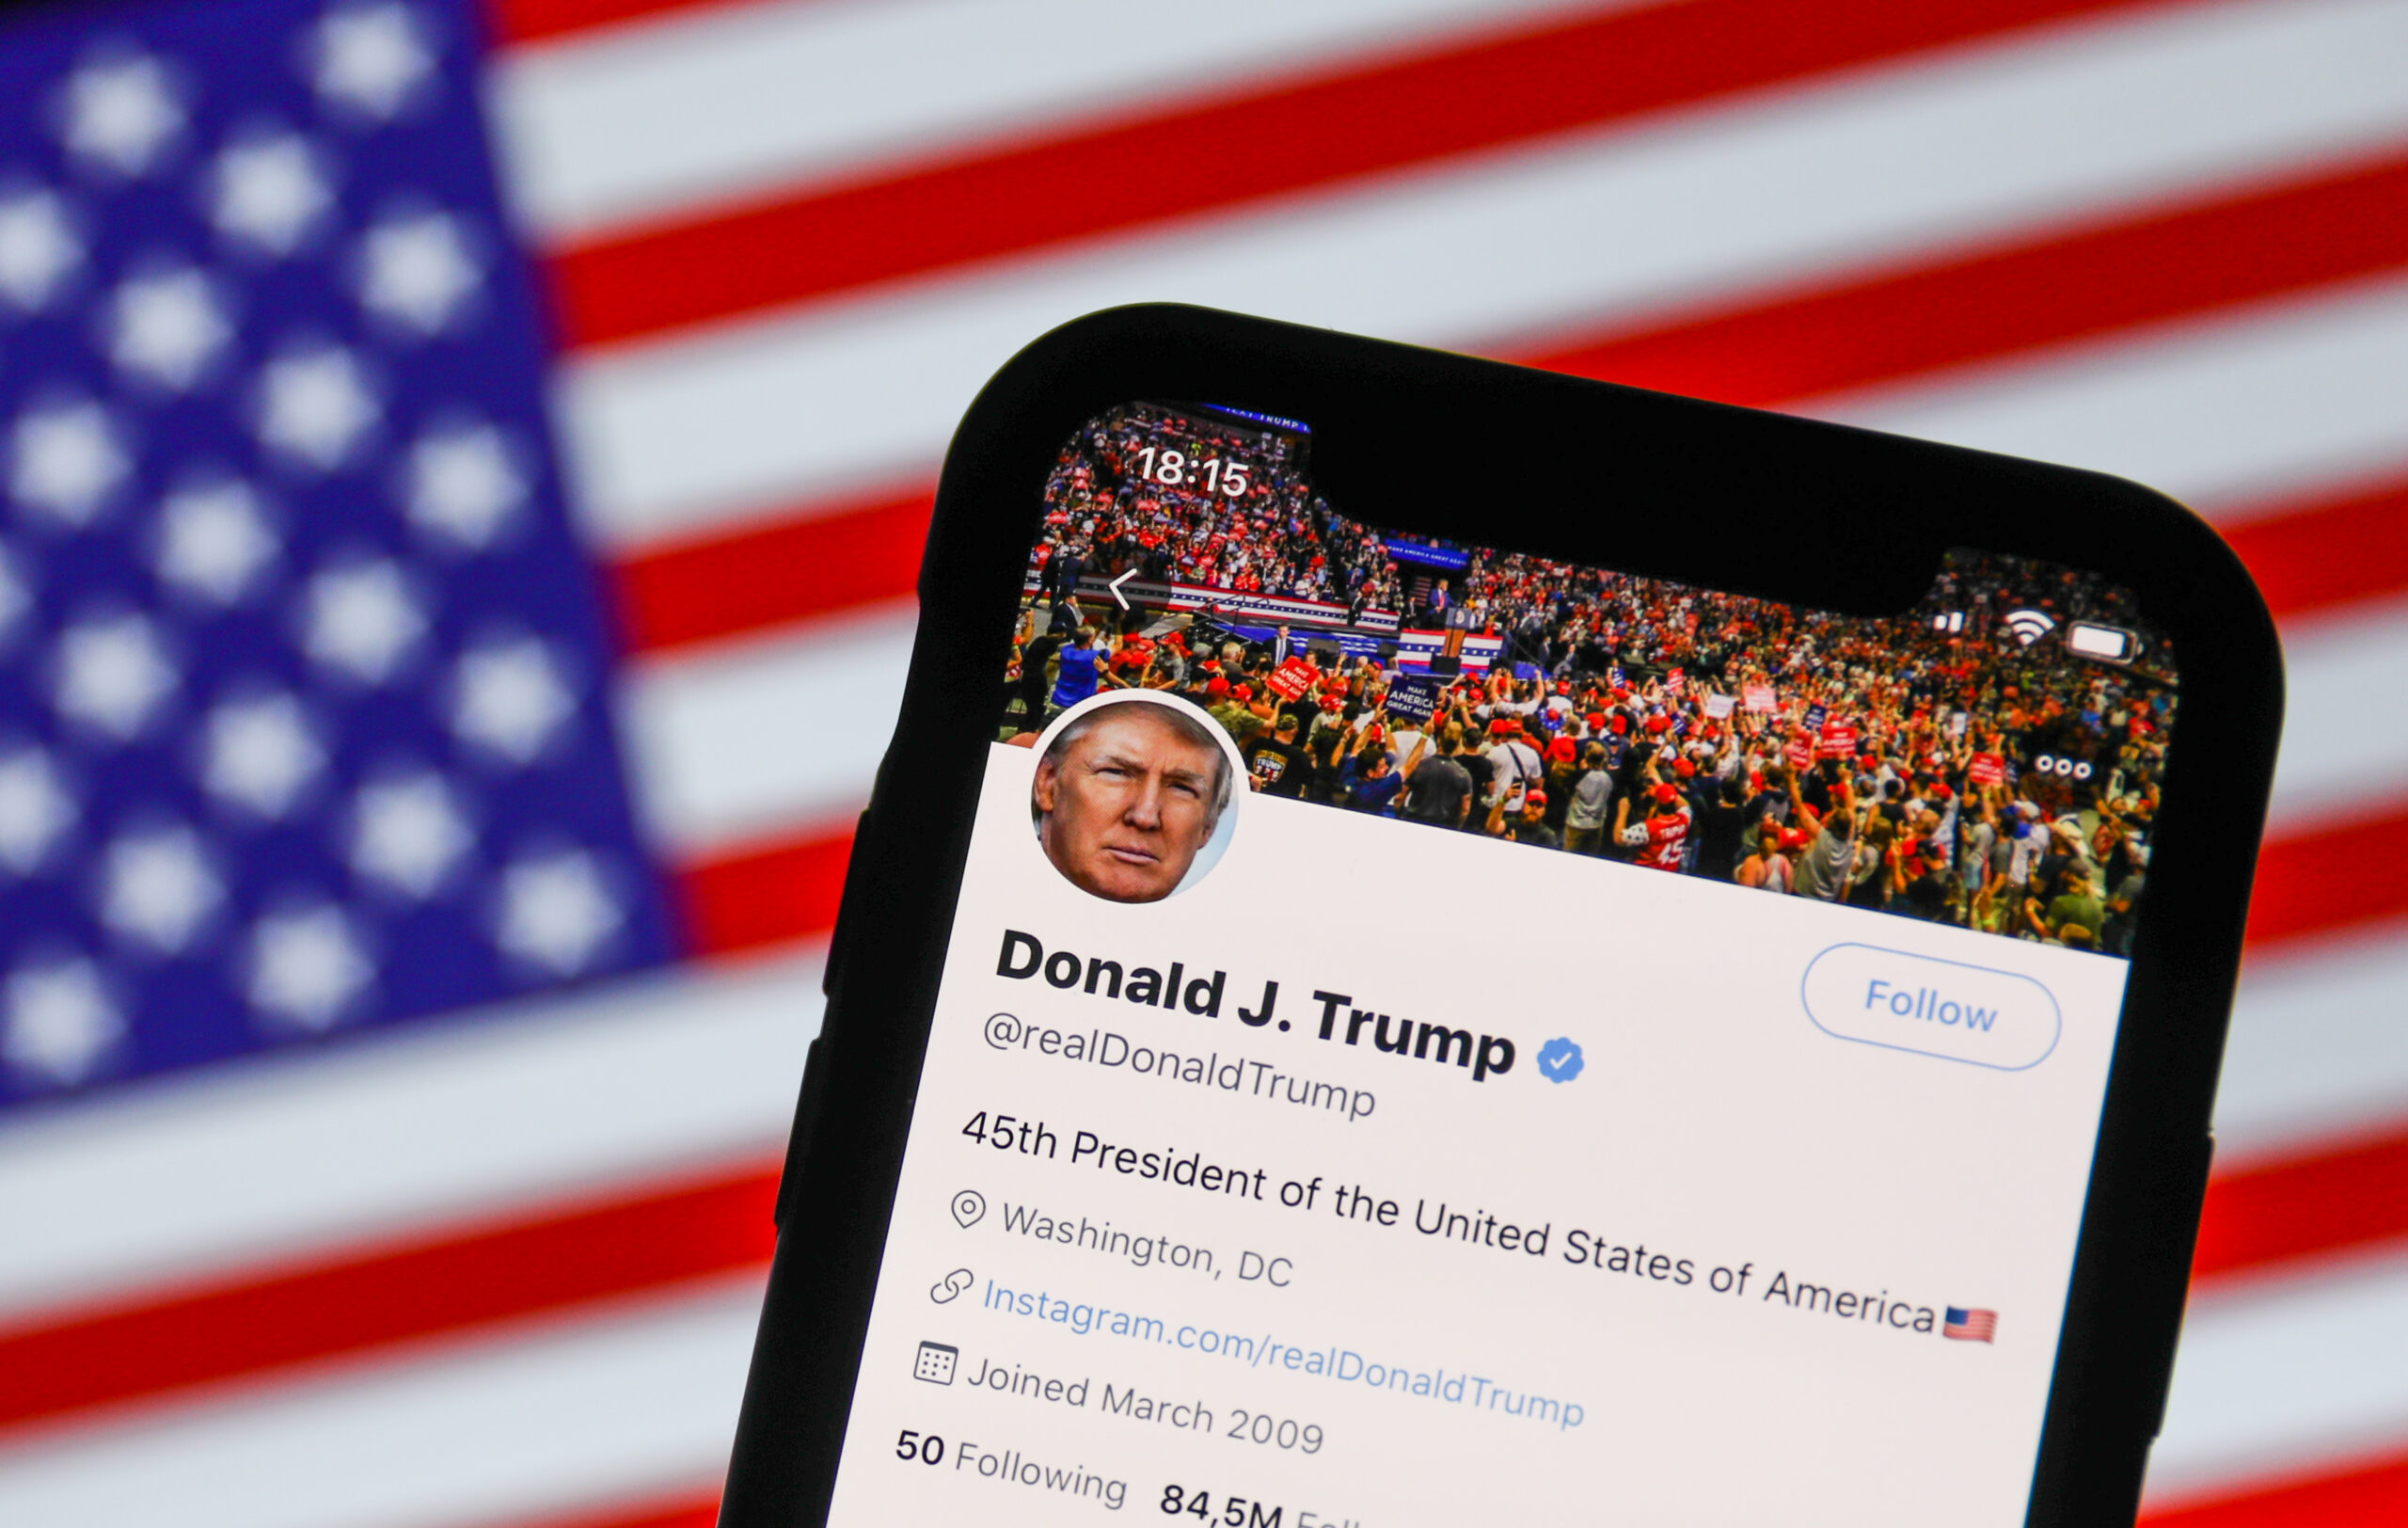 Judge Warns Trump To Refrain From Posting On Social Media, Claiming Messages Could Inflame Civil Unrest – Trump Posts Anyway